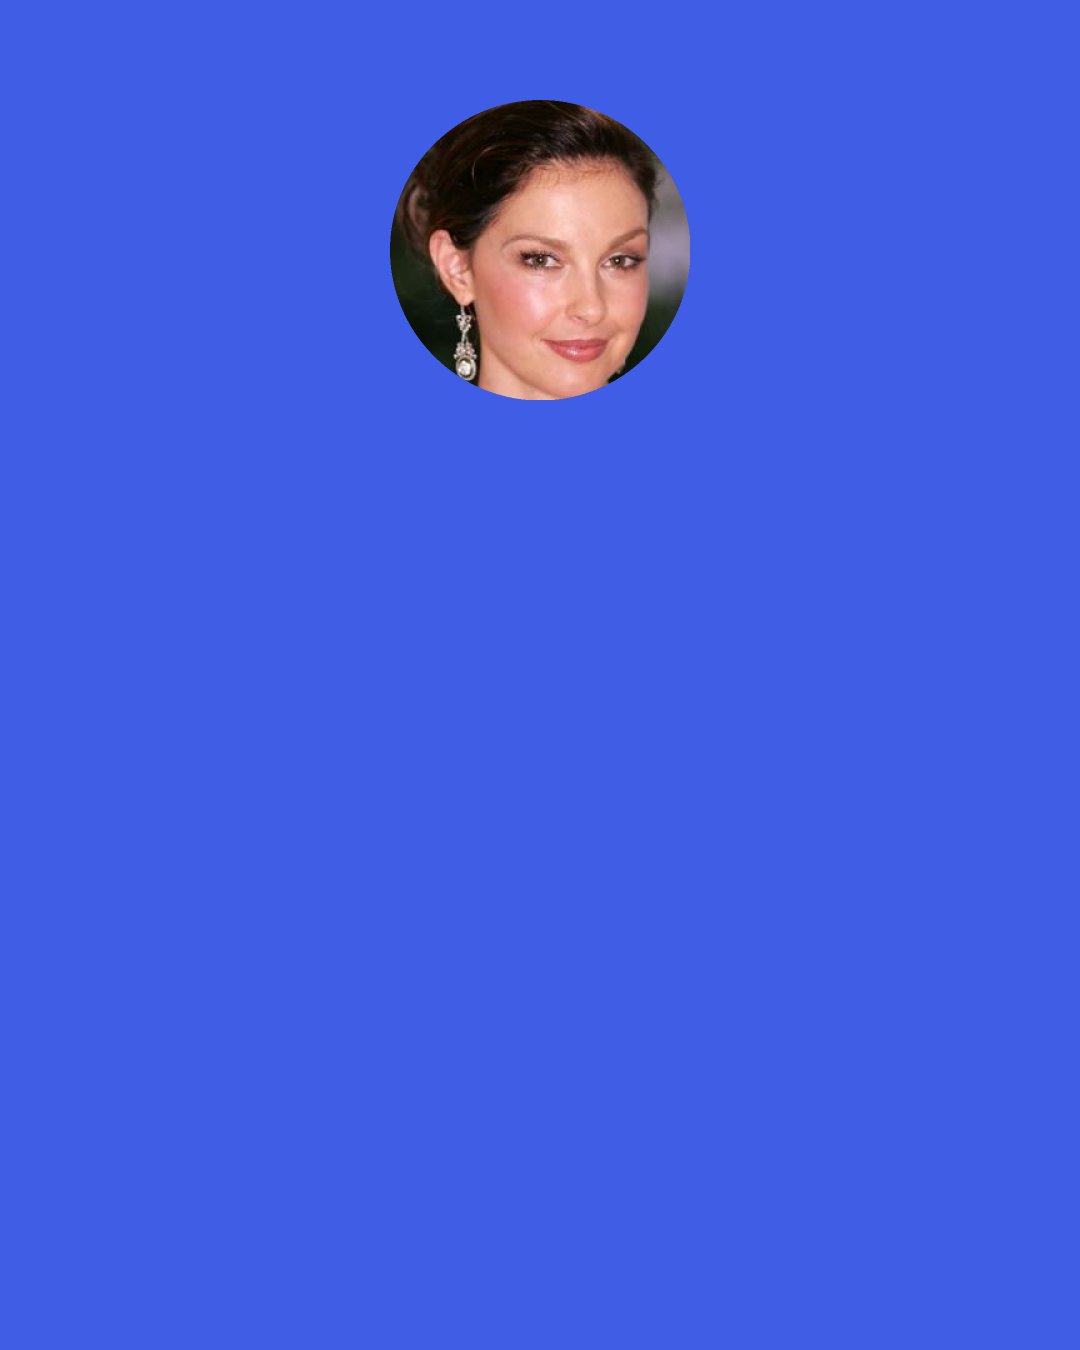 Ashley Judd: When I allow myself to feel all my feelings instead of numbing myself to them, they pass more quickly. I spent my entire life telling everyone I was "OK, damn it." But when you surrender to the [uncomfortable] feelings, there are gifts on the other side: Allowing yourself to feel loneliness forces you to reach out. Letting yourself get angry gives you strength, energy and motivation.